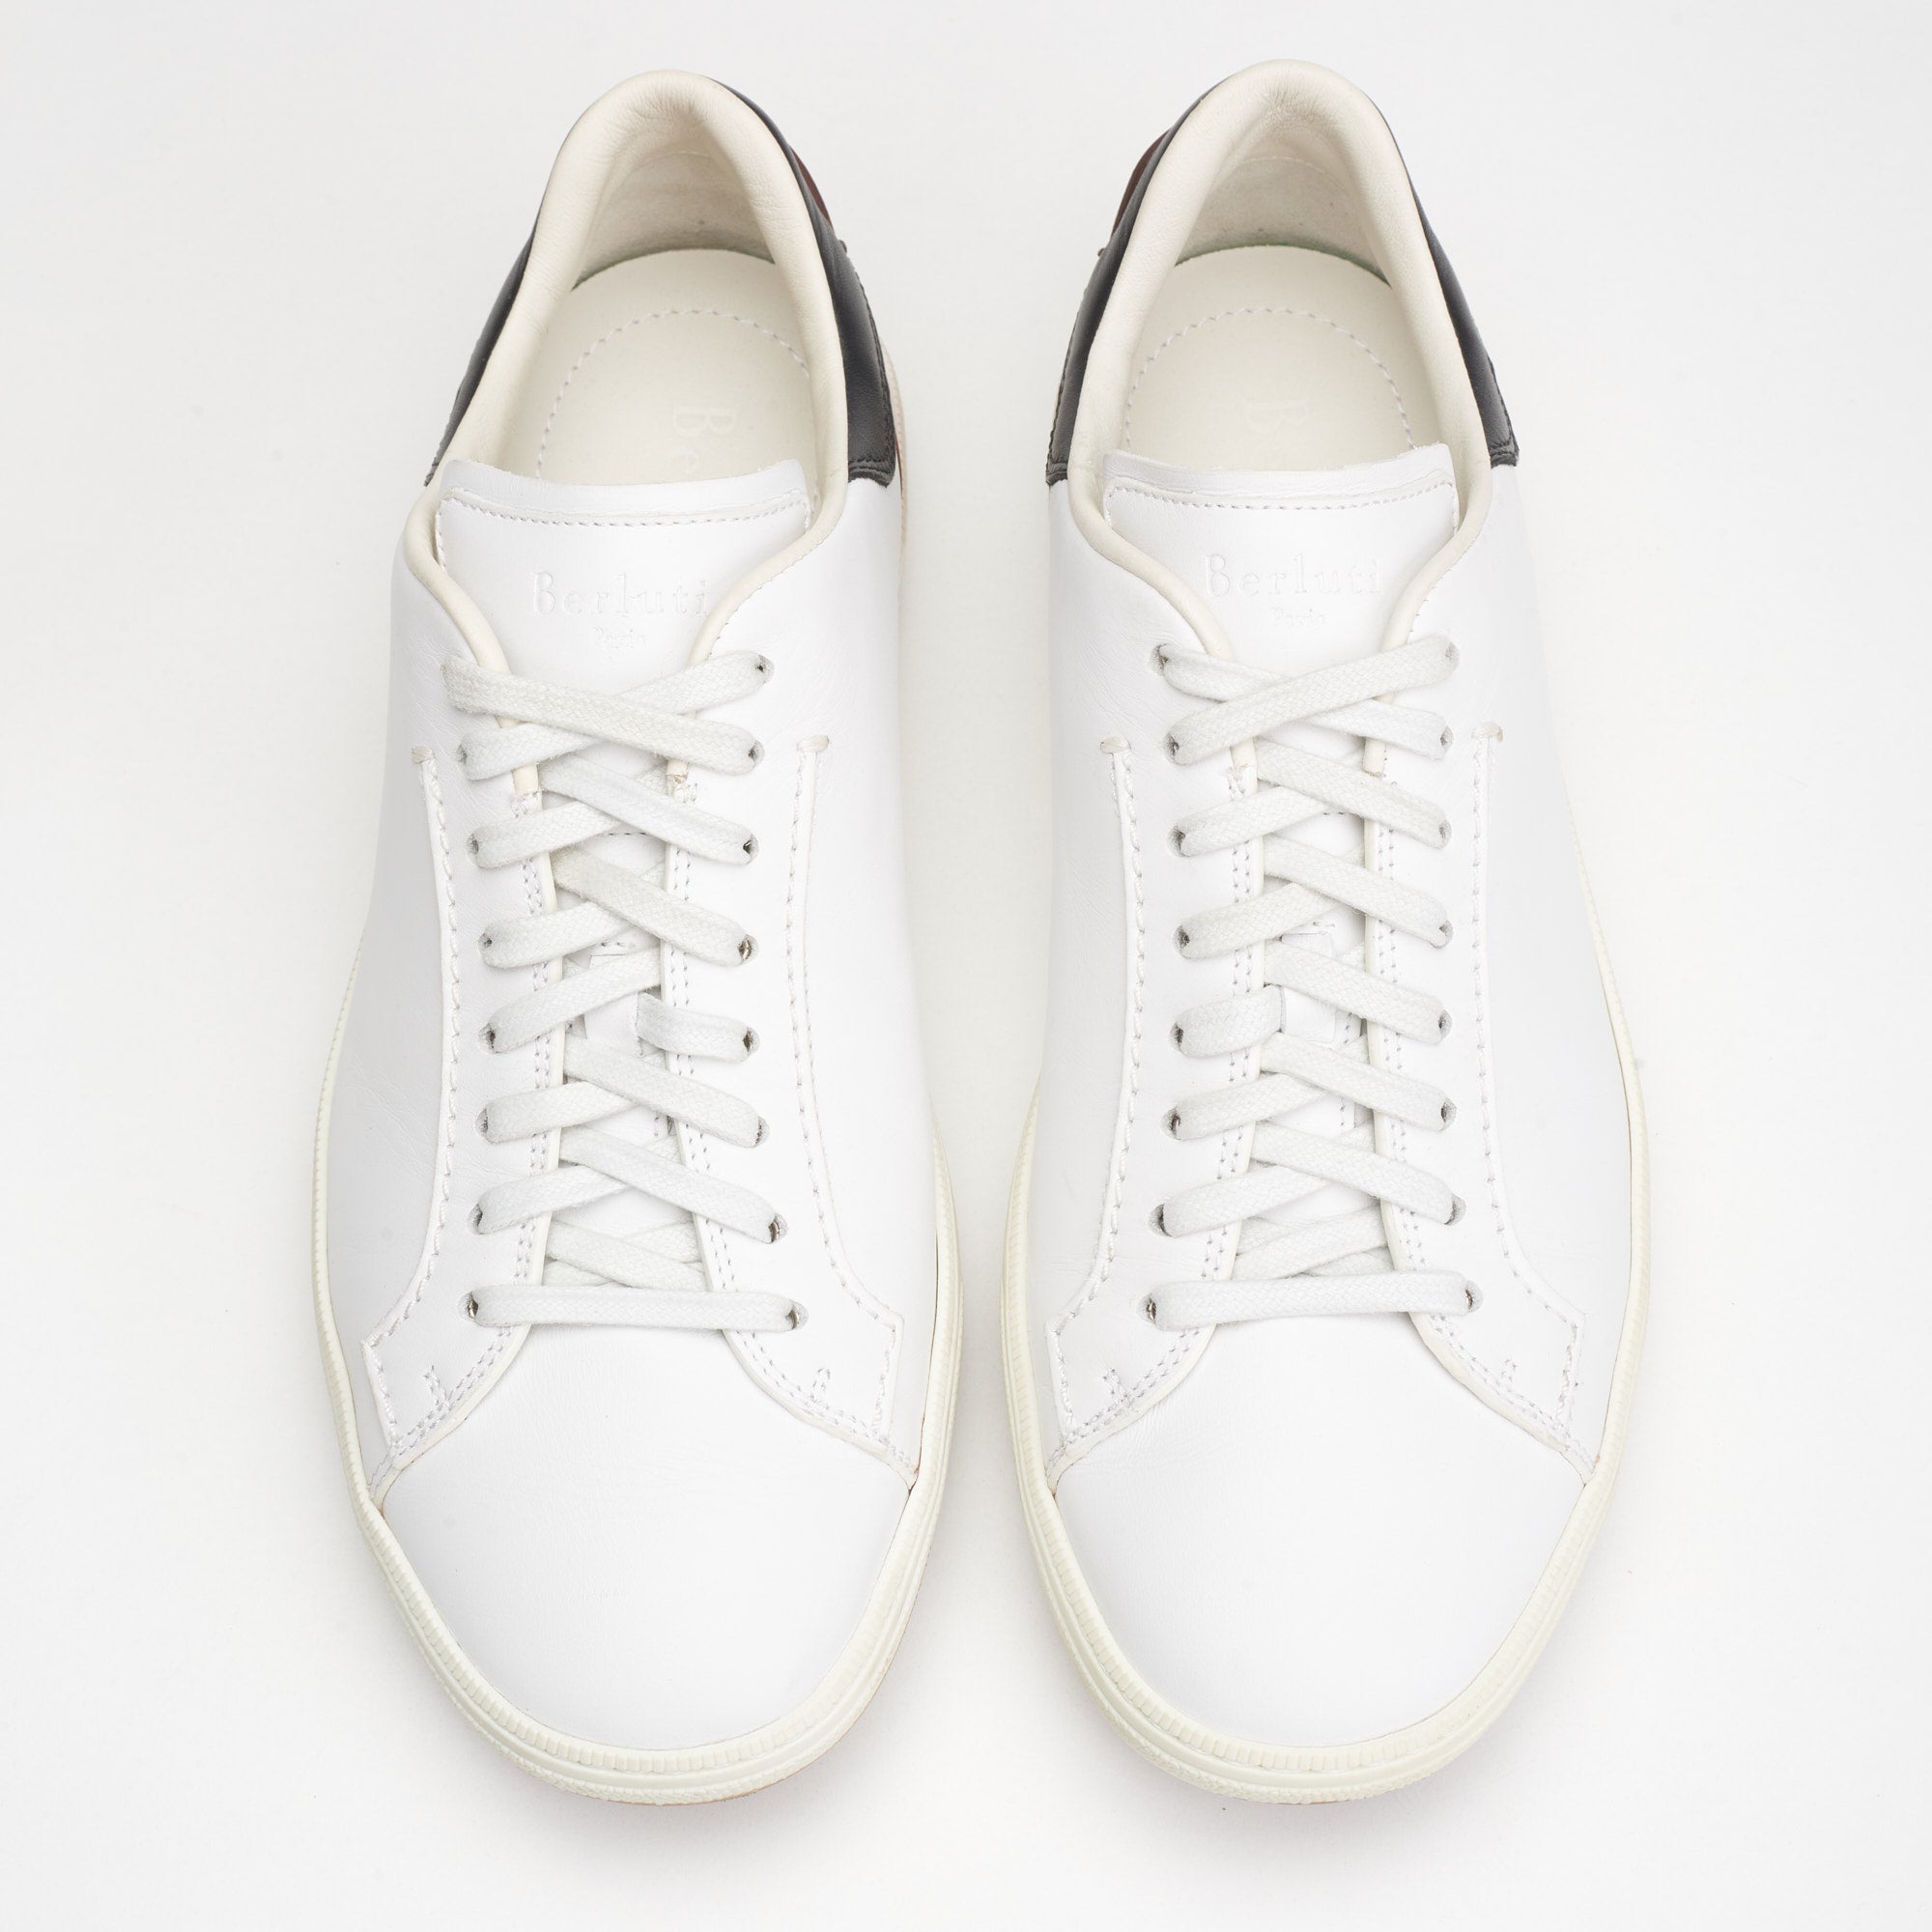 BERLUTI Paris White Leather 8 Eyelet Lace-up Sneaker Shoes Size 6.5 US 7.5